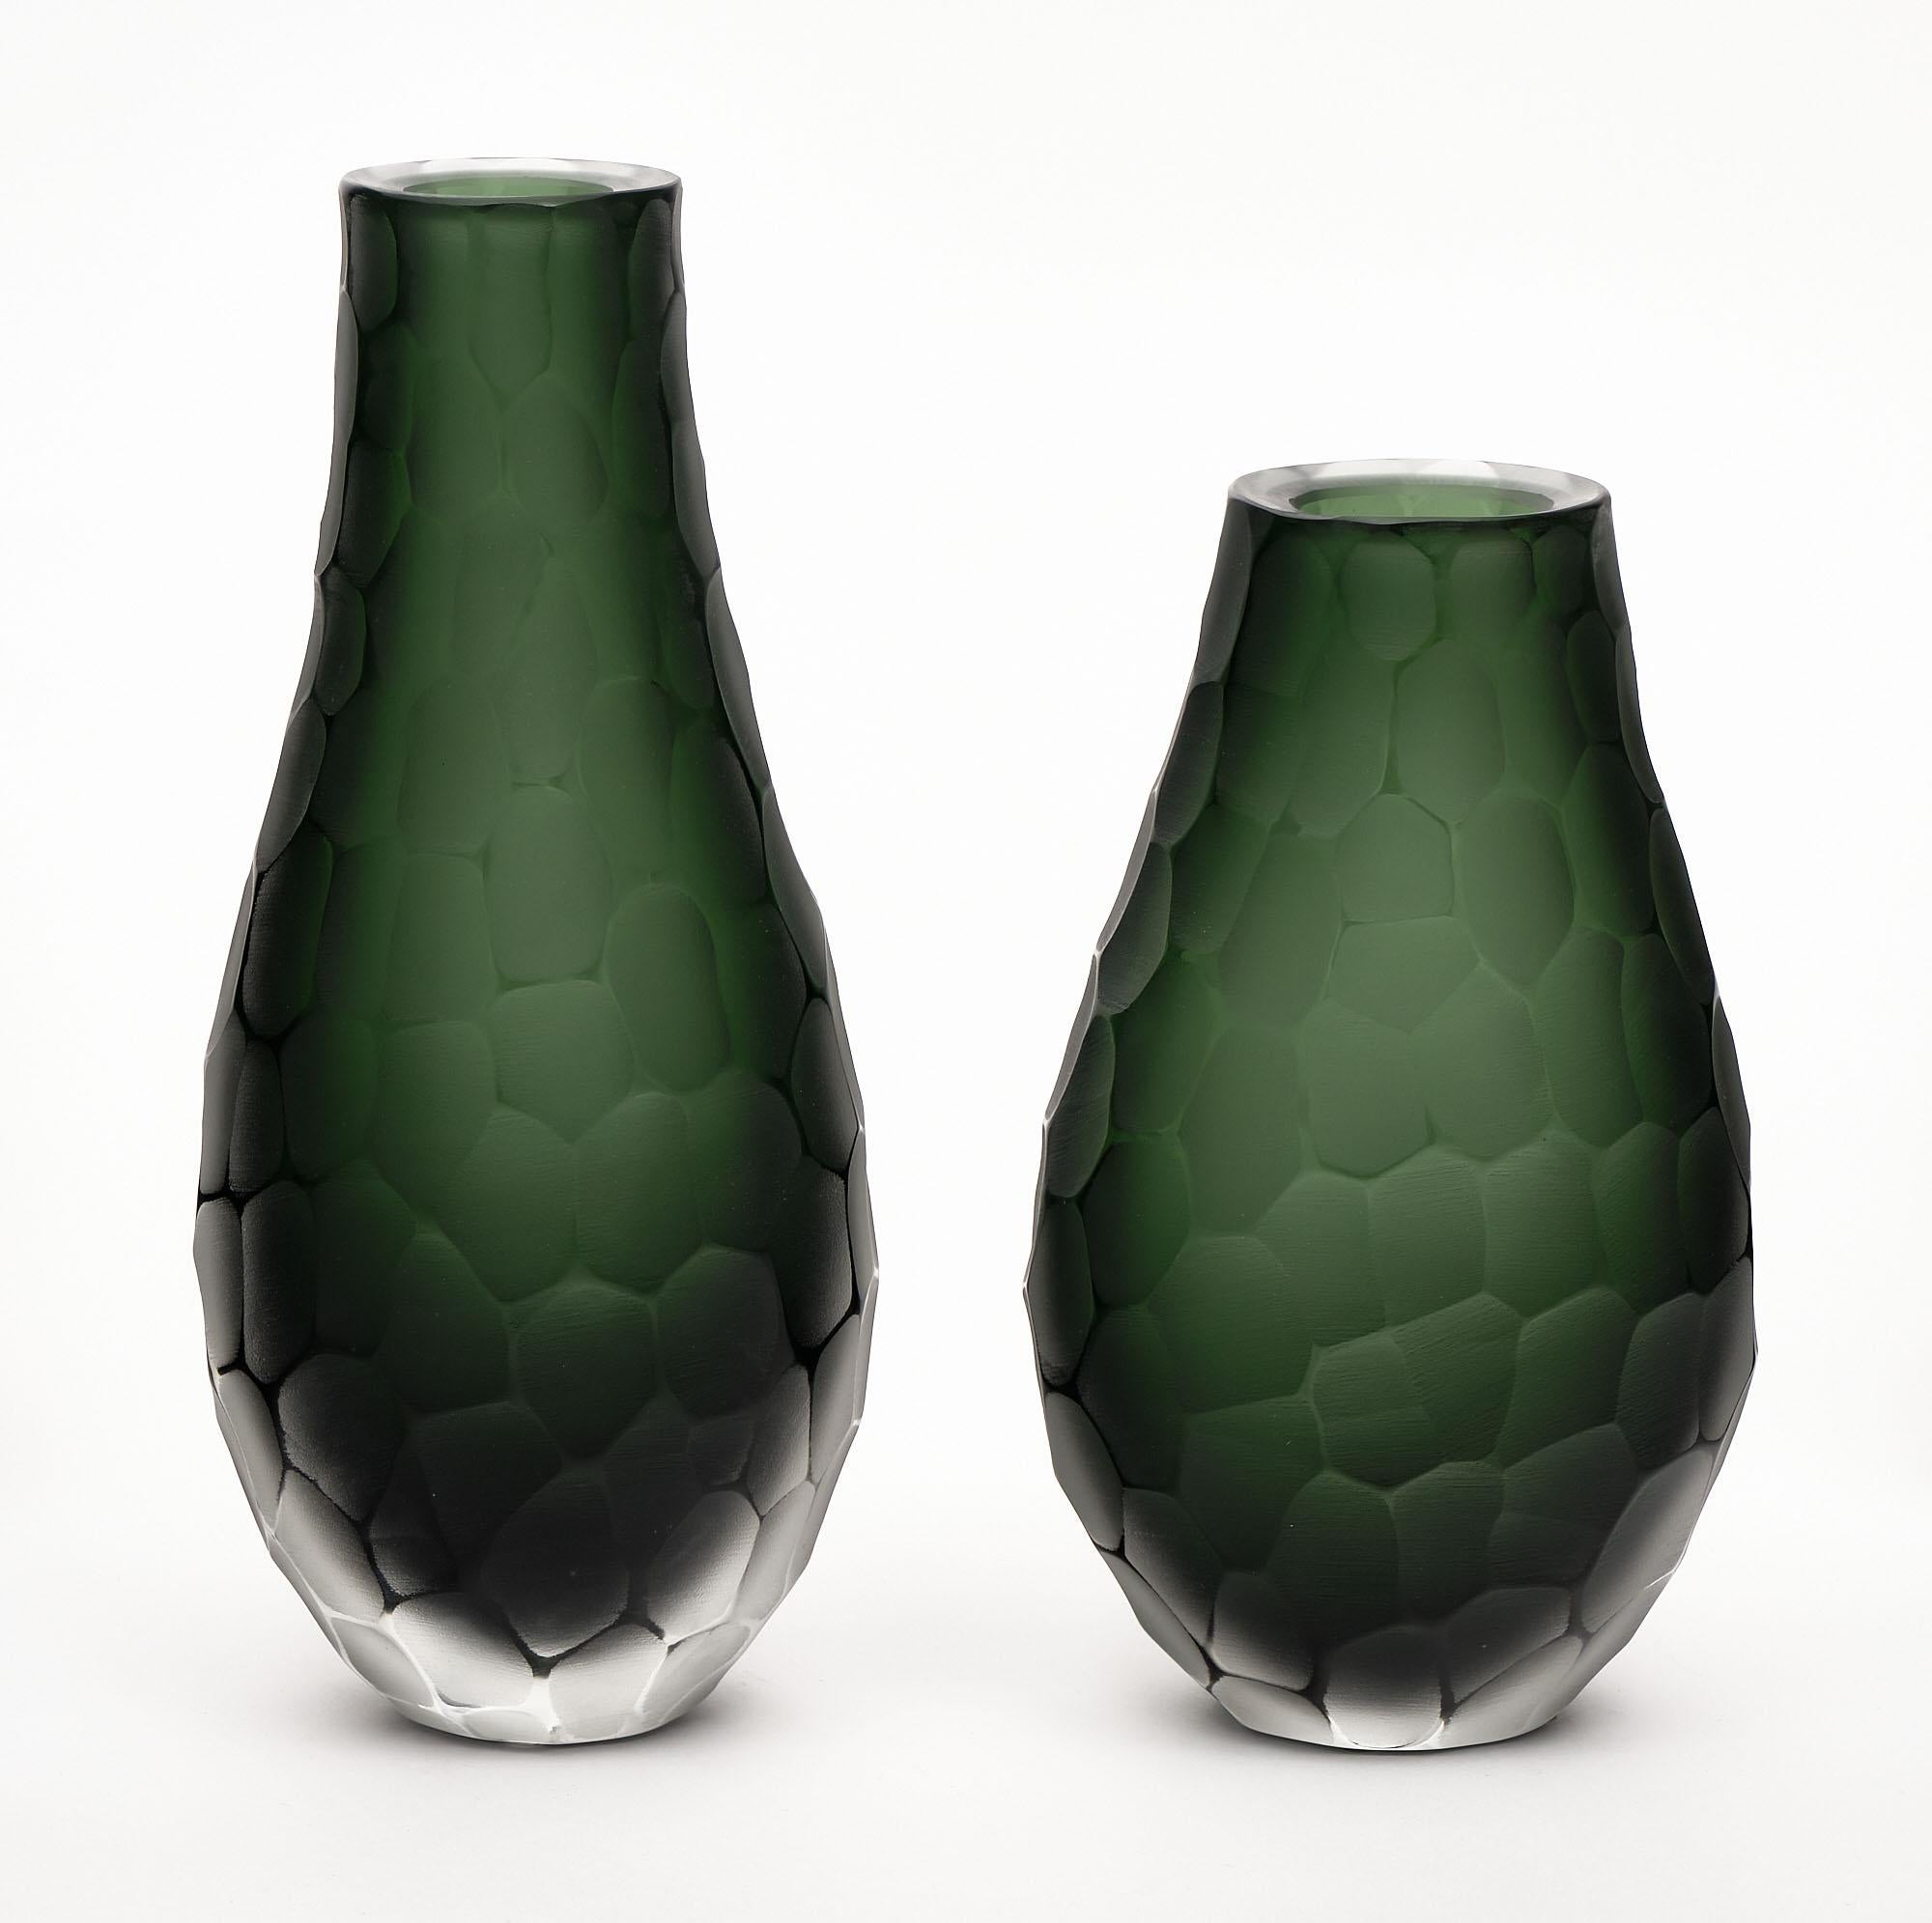 Vases - “Vetro Battuto” green Murano glass vases originally designed by Carlo Scarpa. This set has a beautiful forest green color to the hand-blown glass and features the “vetro battuto” or hammered technique. The measurements listed are for the